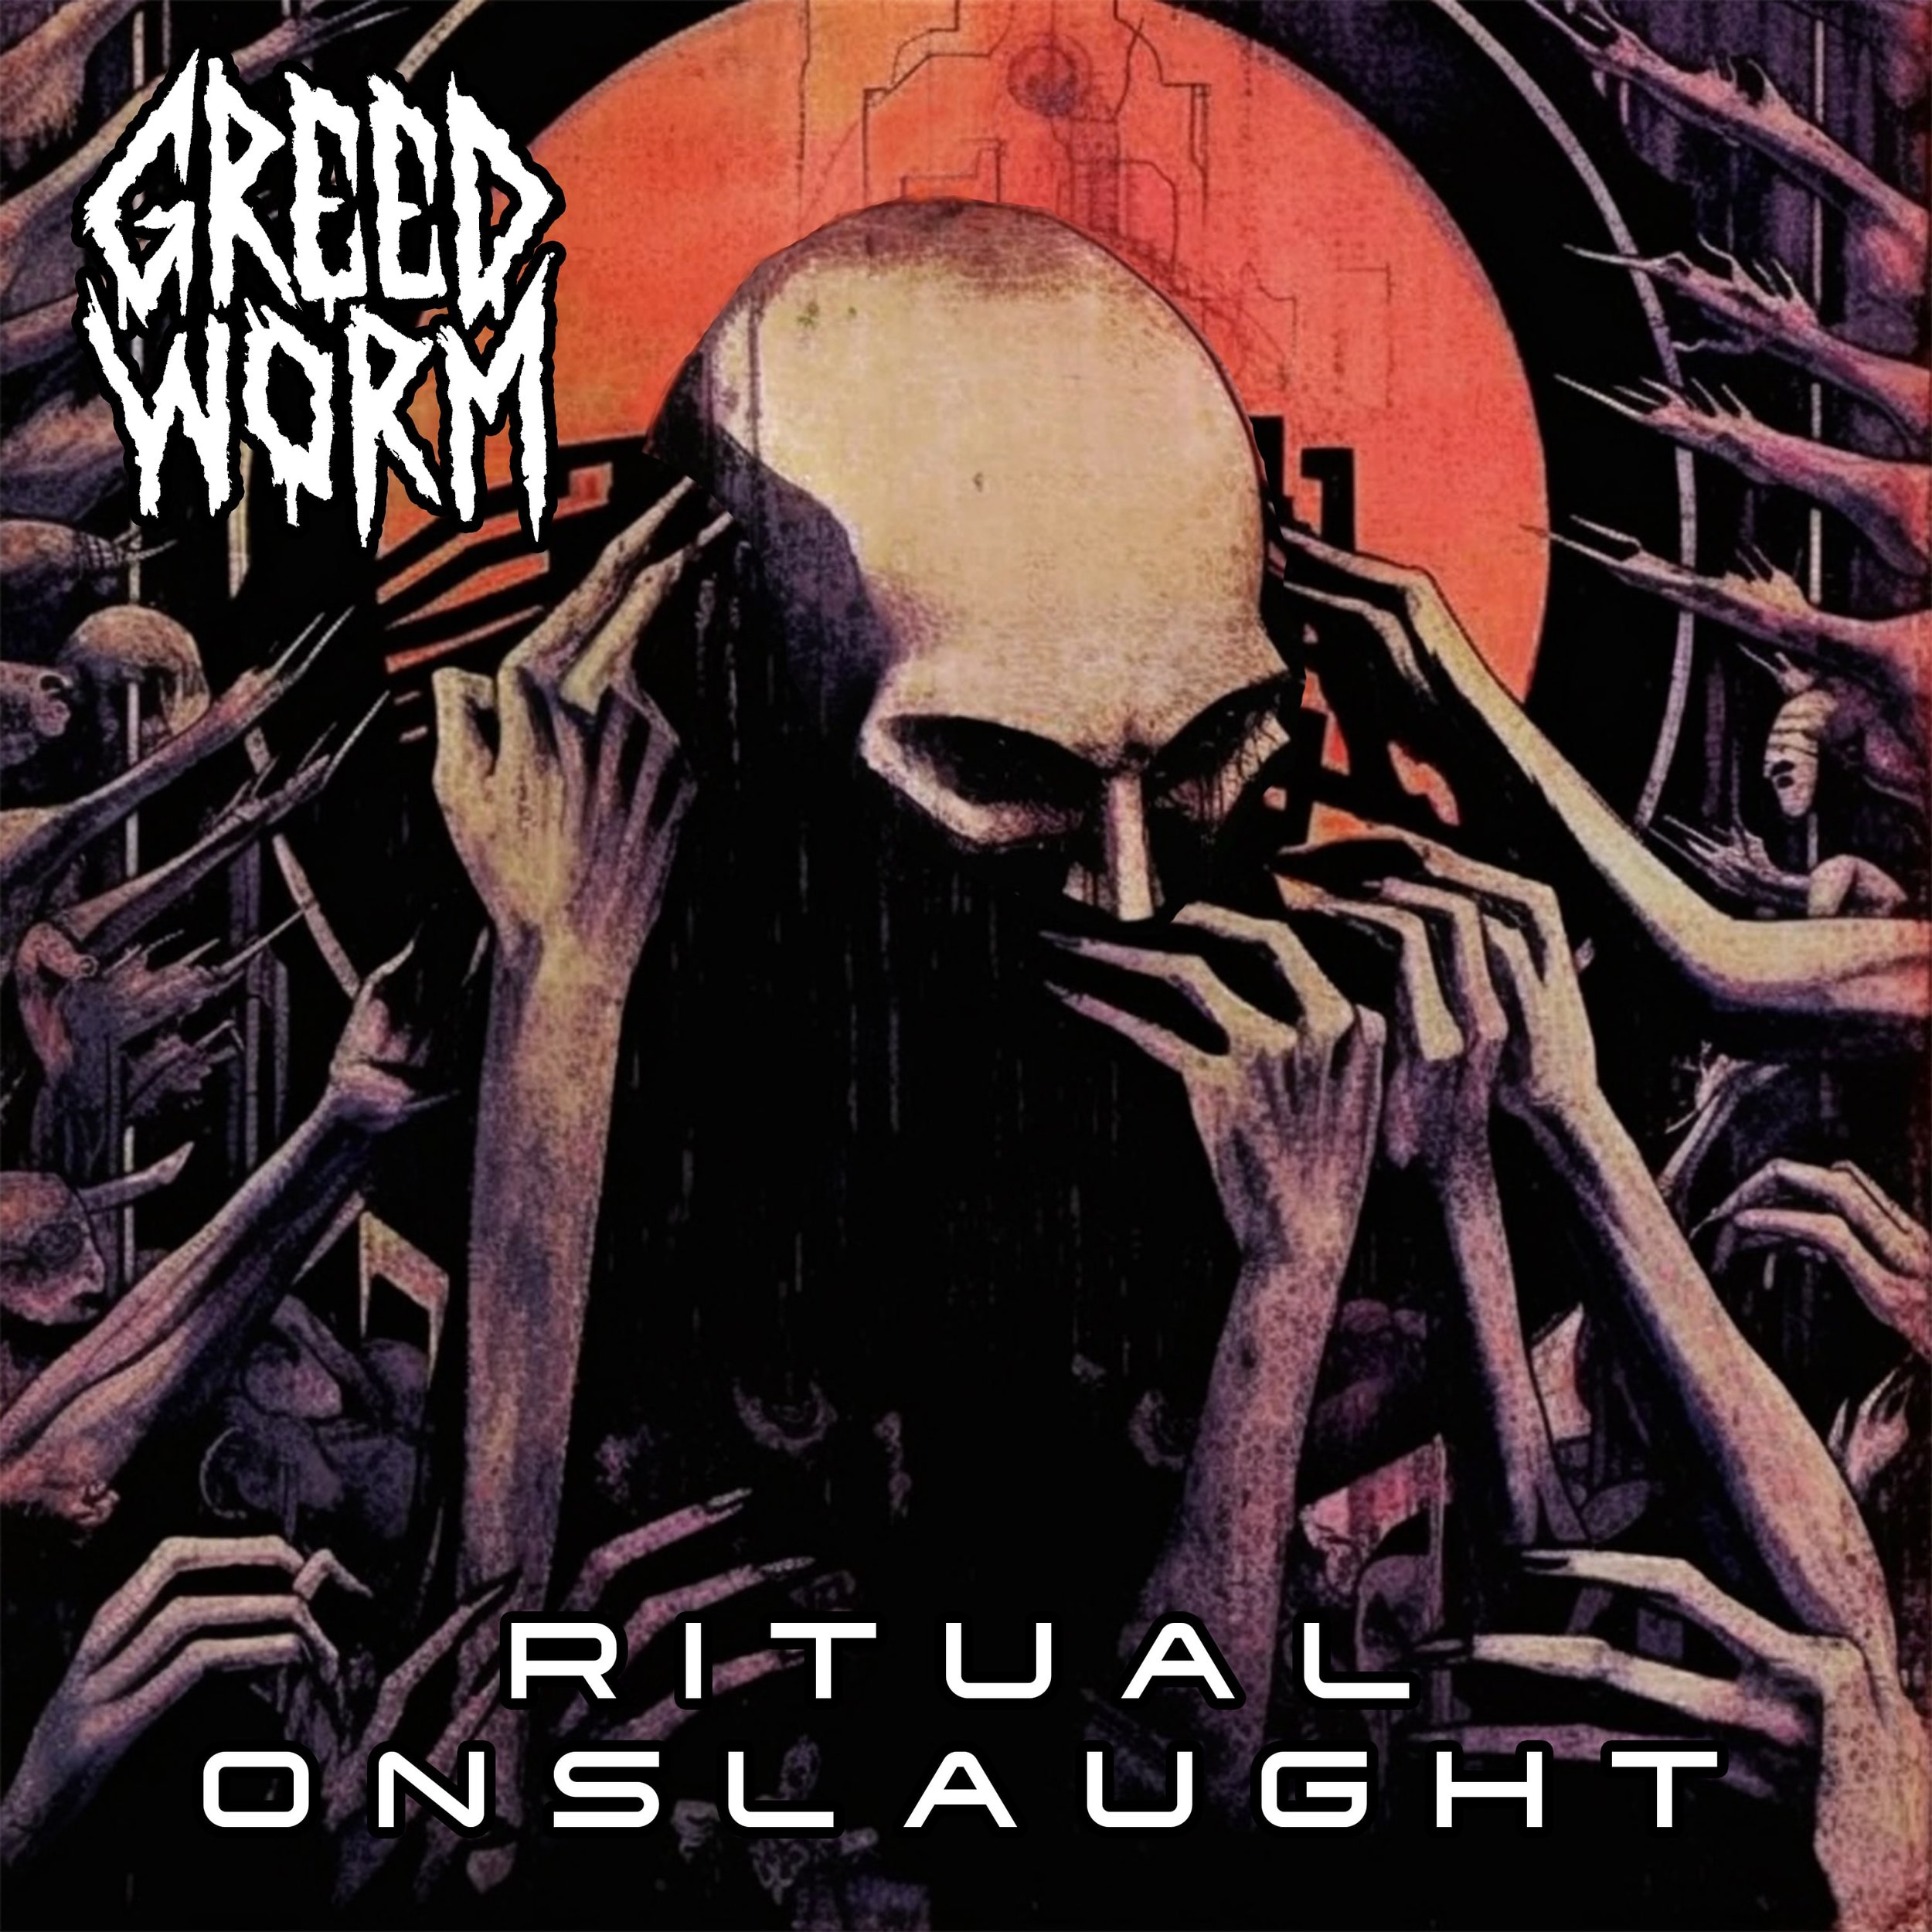 Greed Worm - Ritual Onslaught - Cover.jpg